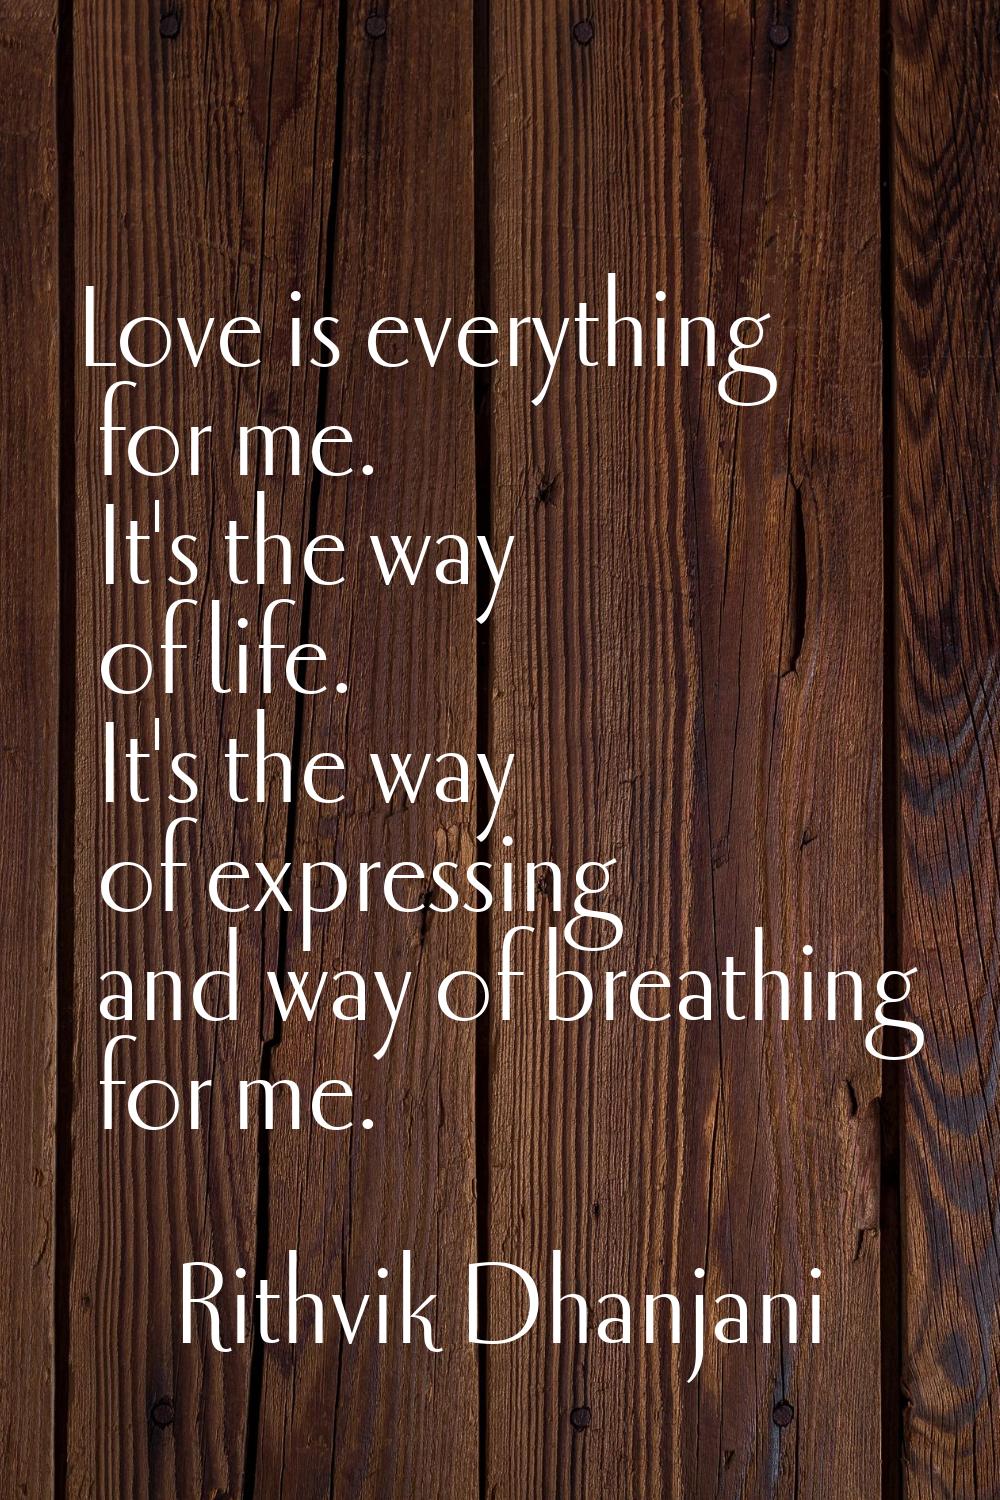 Love is everything for me. It's the way of life. It's the way of expressing and way of breathing fo